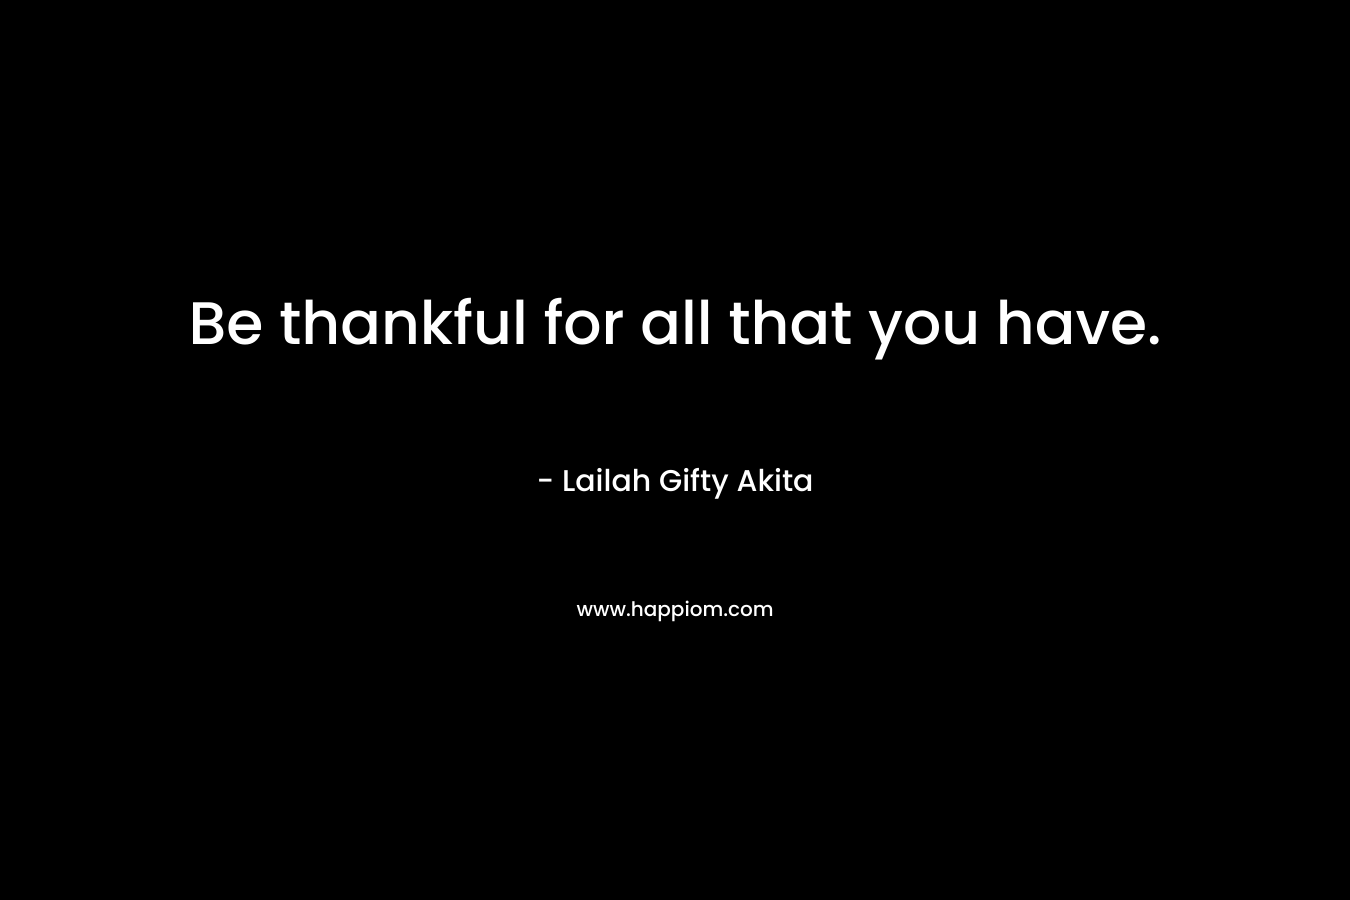 Be thankful for all that you have.